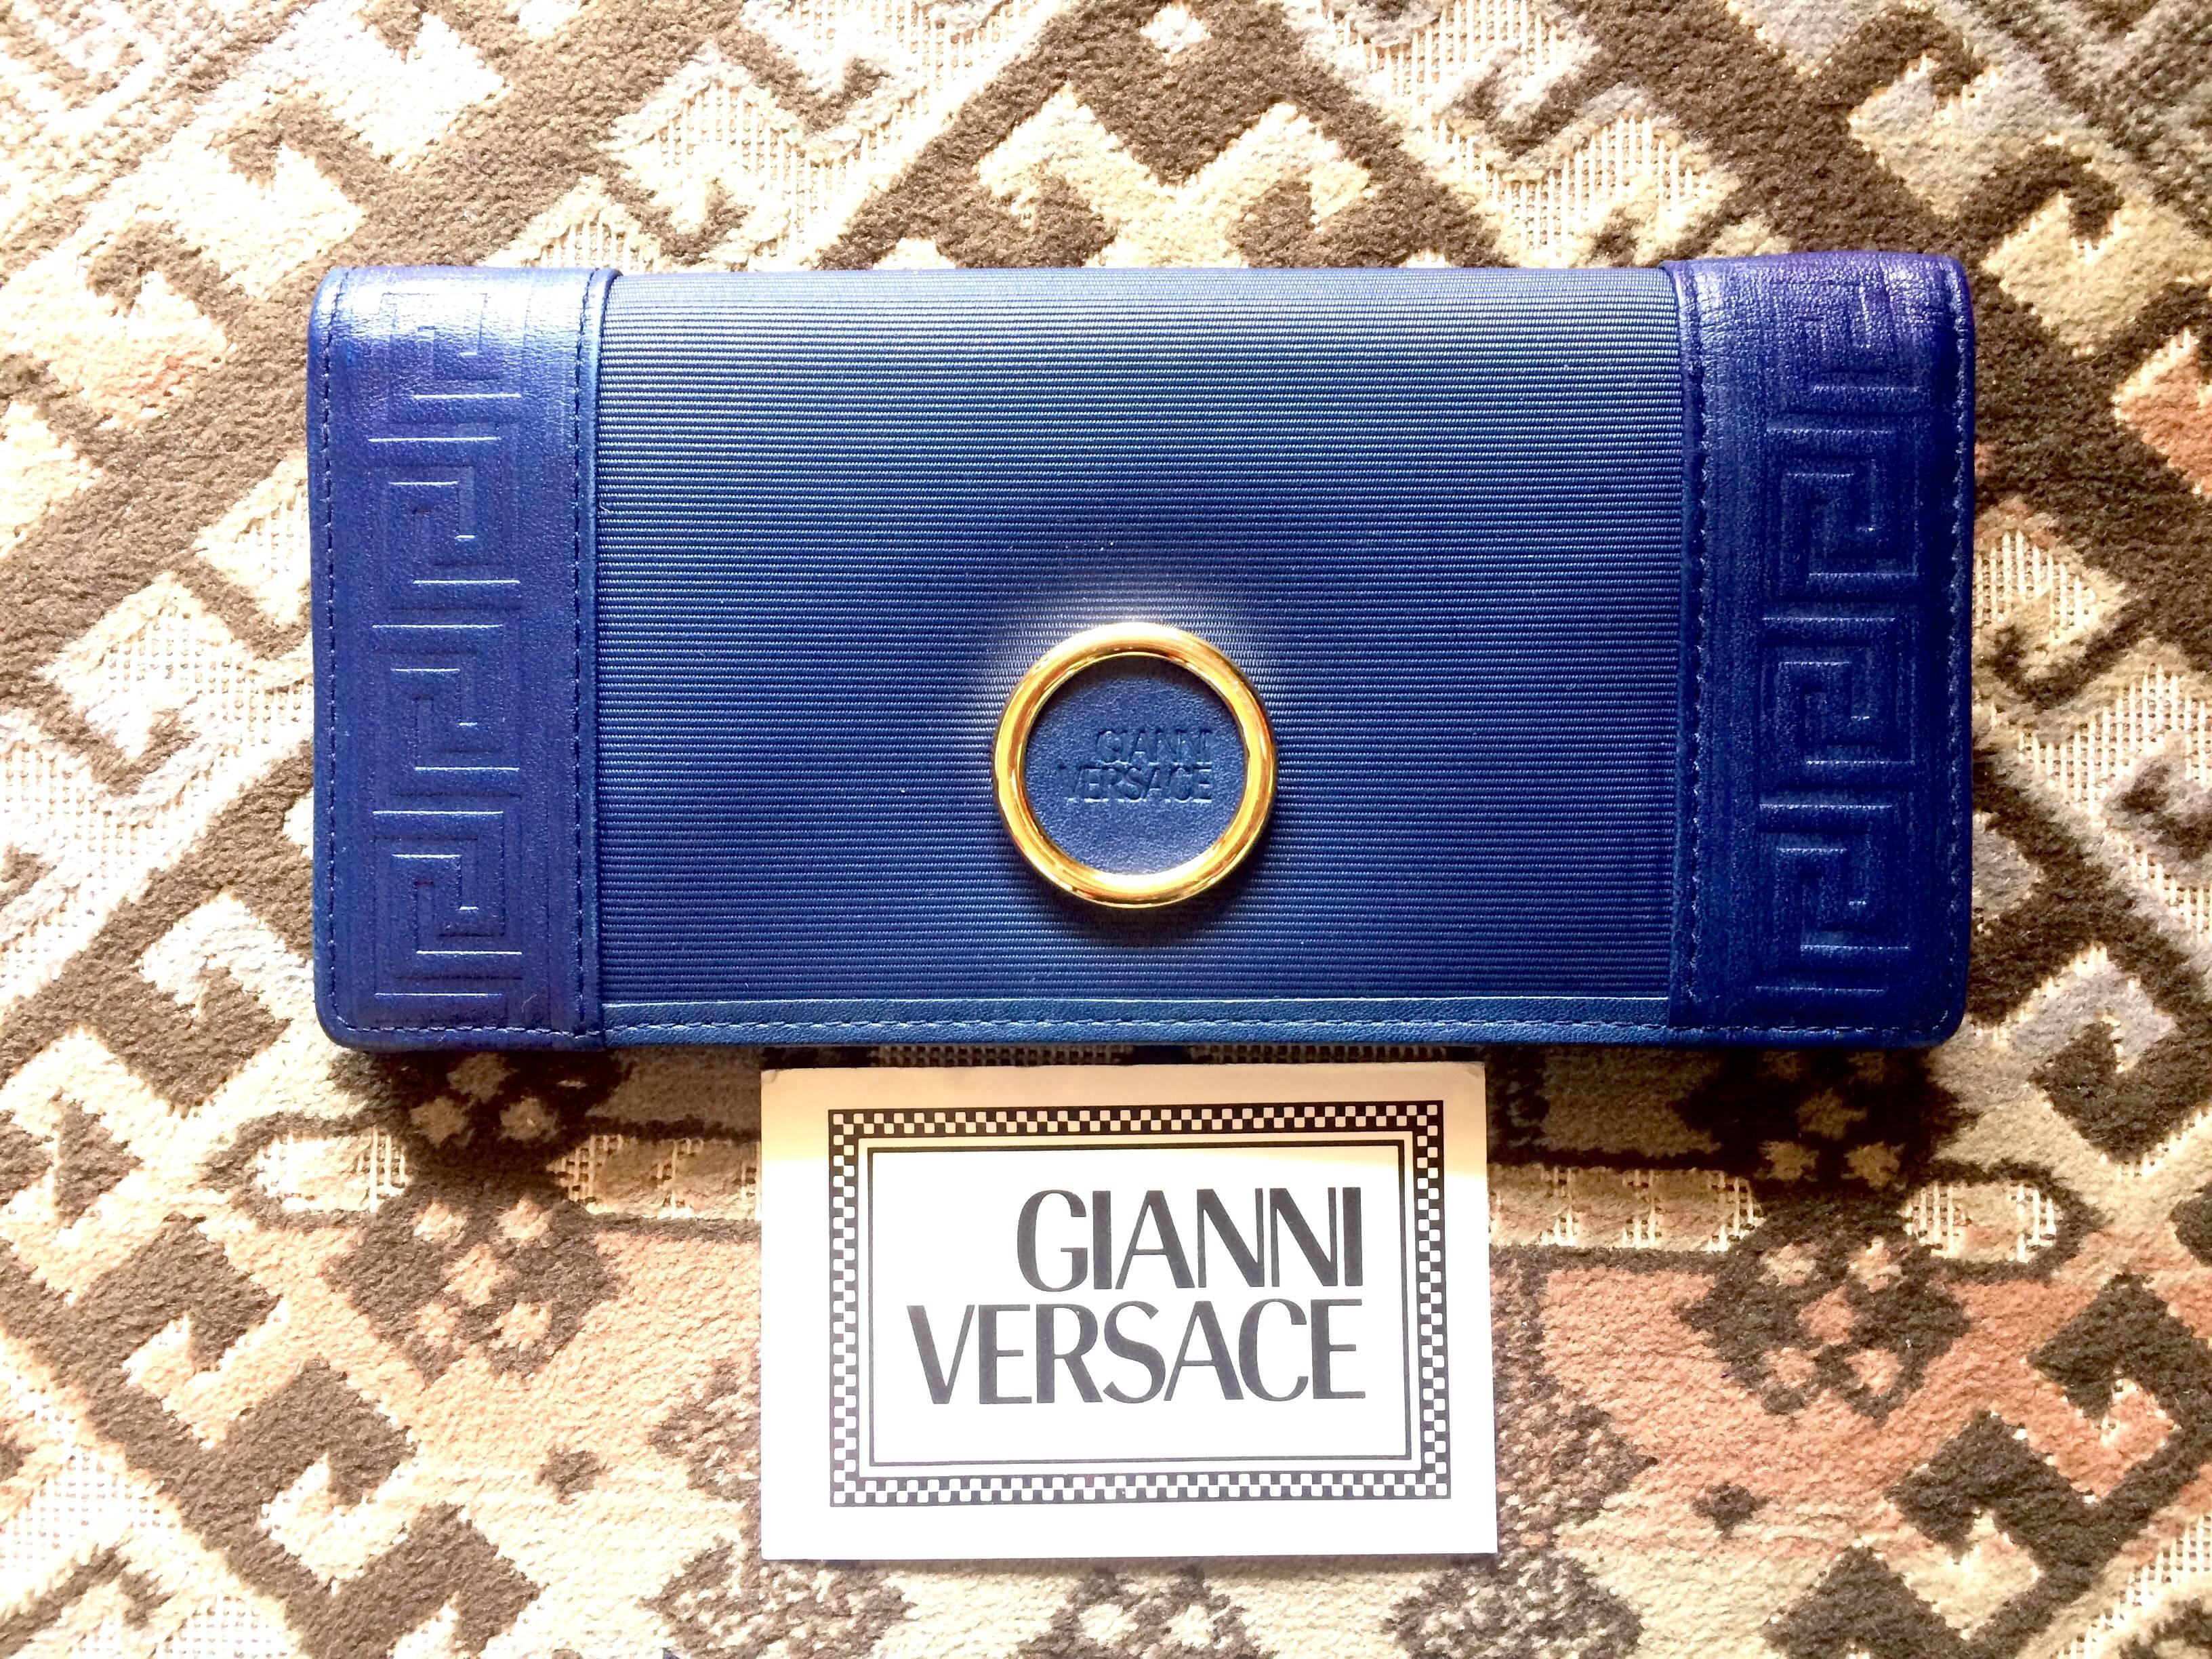 Vintage Gianni Versace blue wallet with geometric pattern and logo round motif. 5